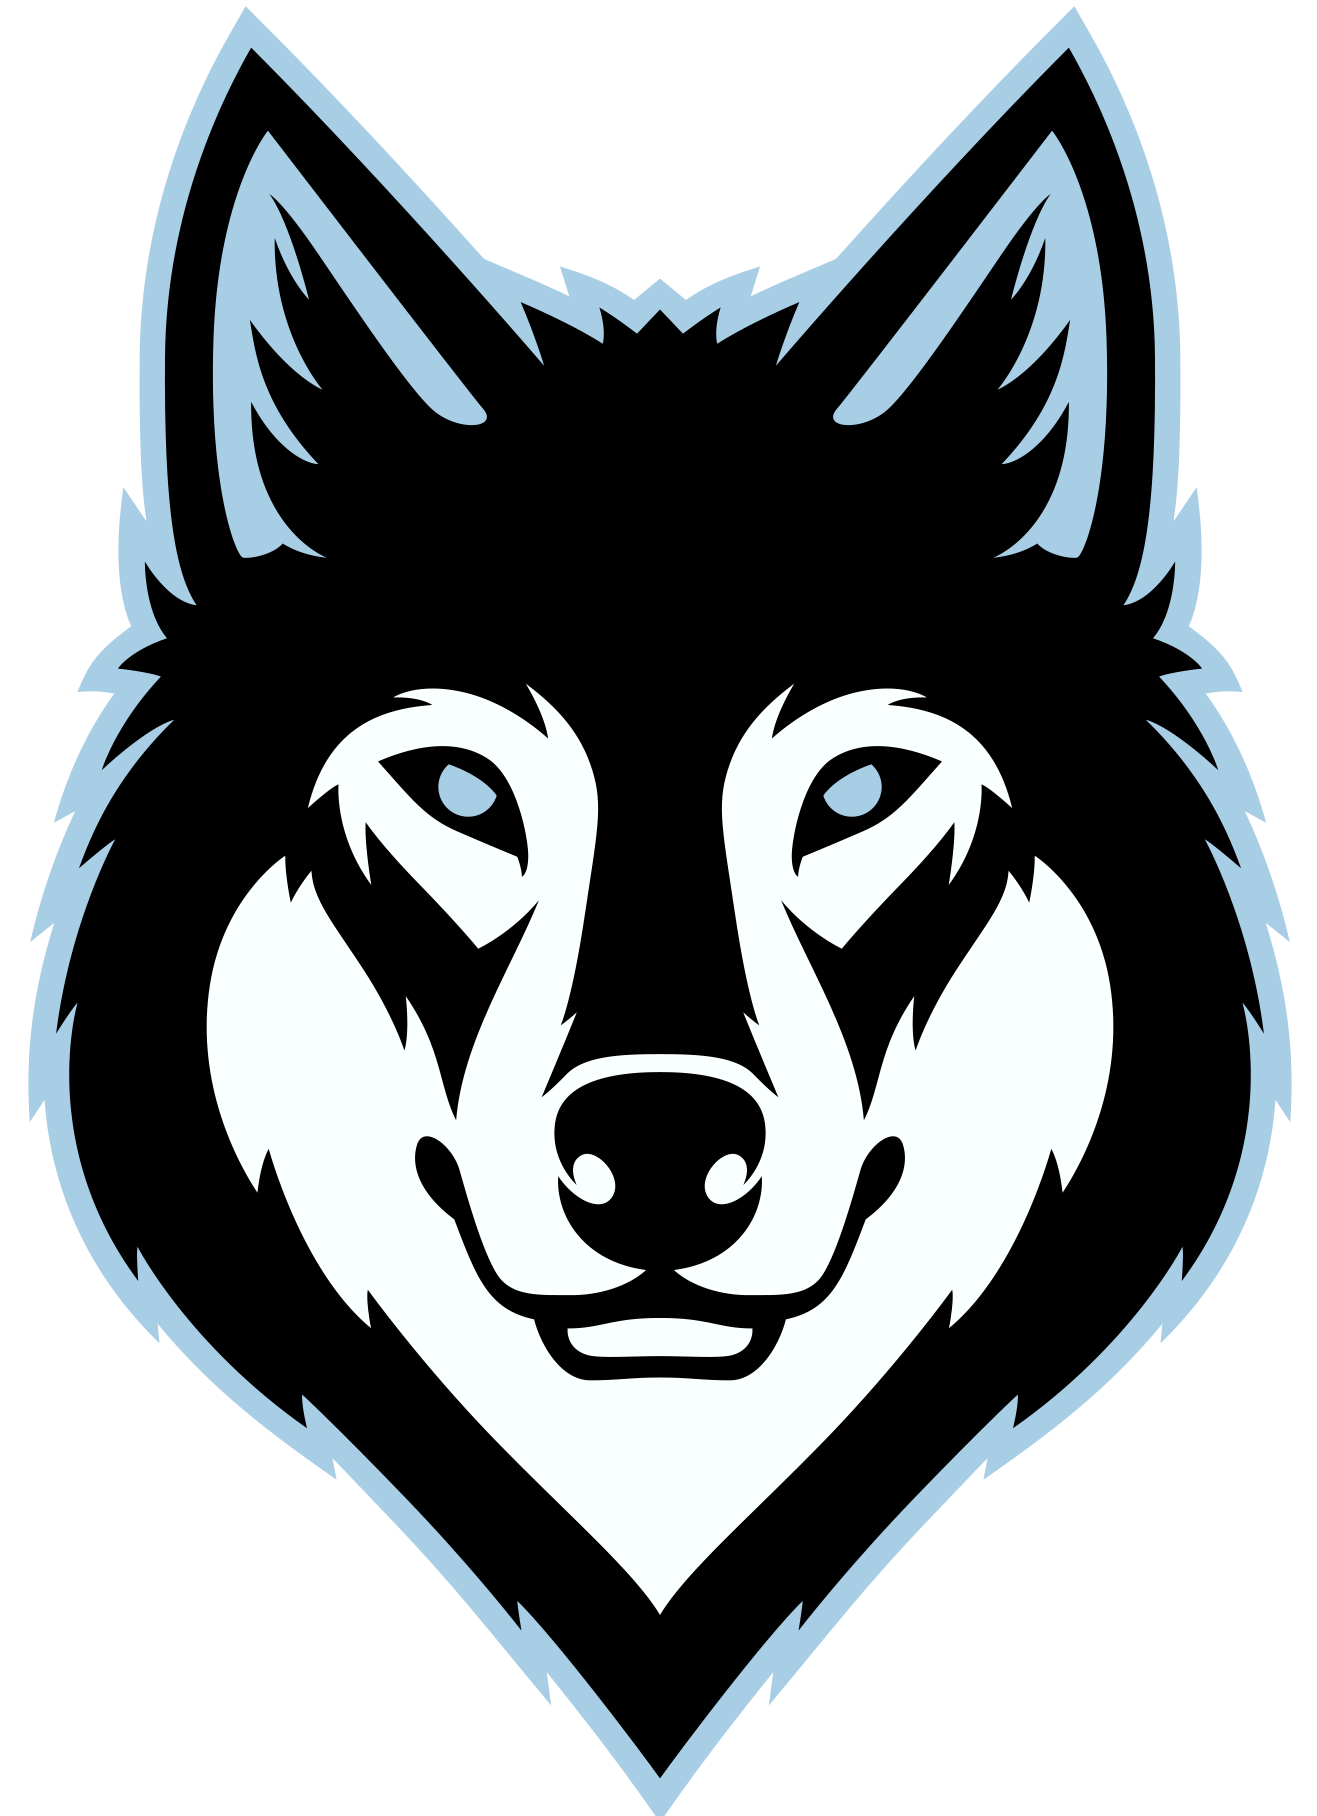 An image of a wolf (WCECHS's mascot).